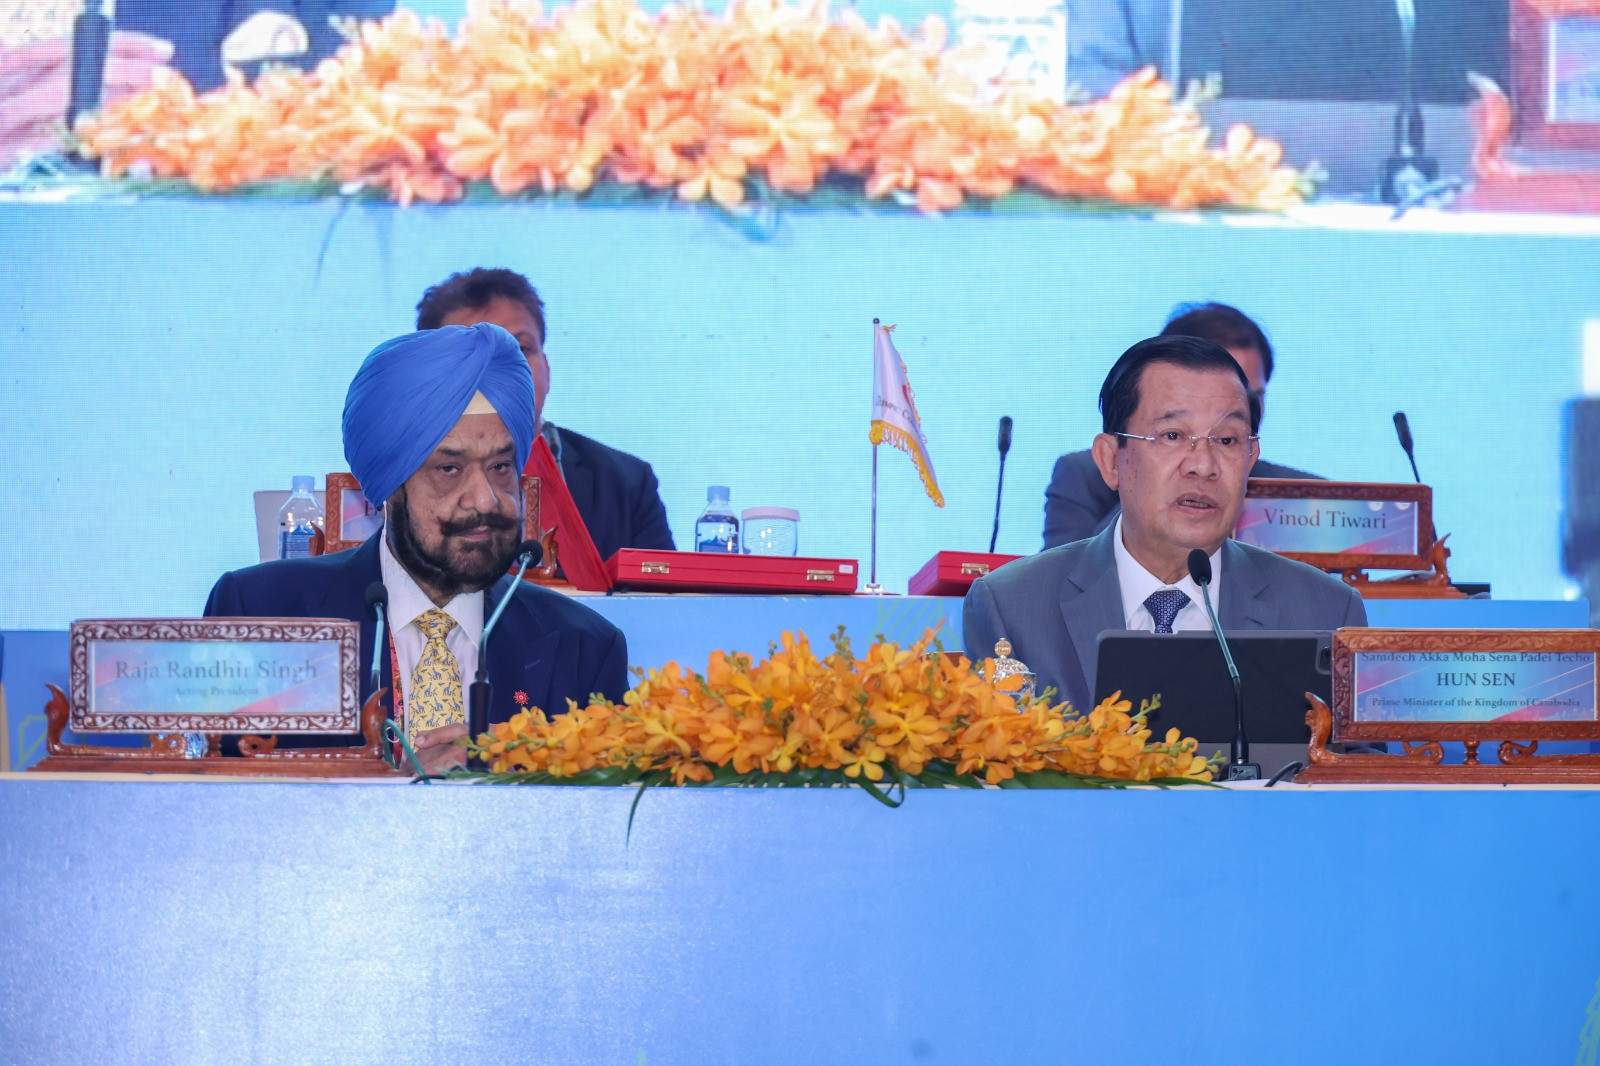 Cambodian Prime Minister Hun Sen, right, claimed that "peace is priceless" at the OCA General Assembly in Phnom Penh ©OCA